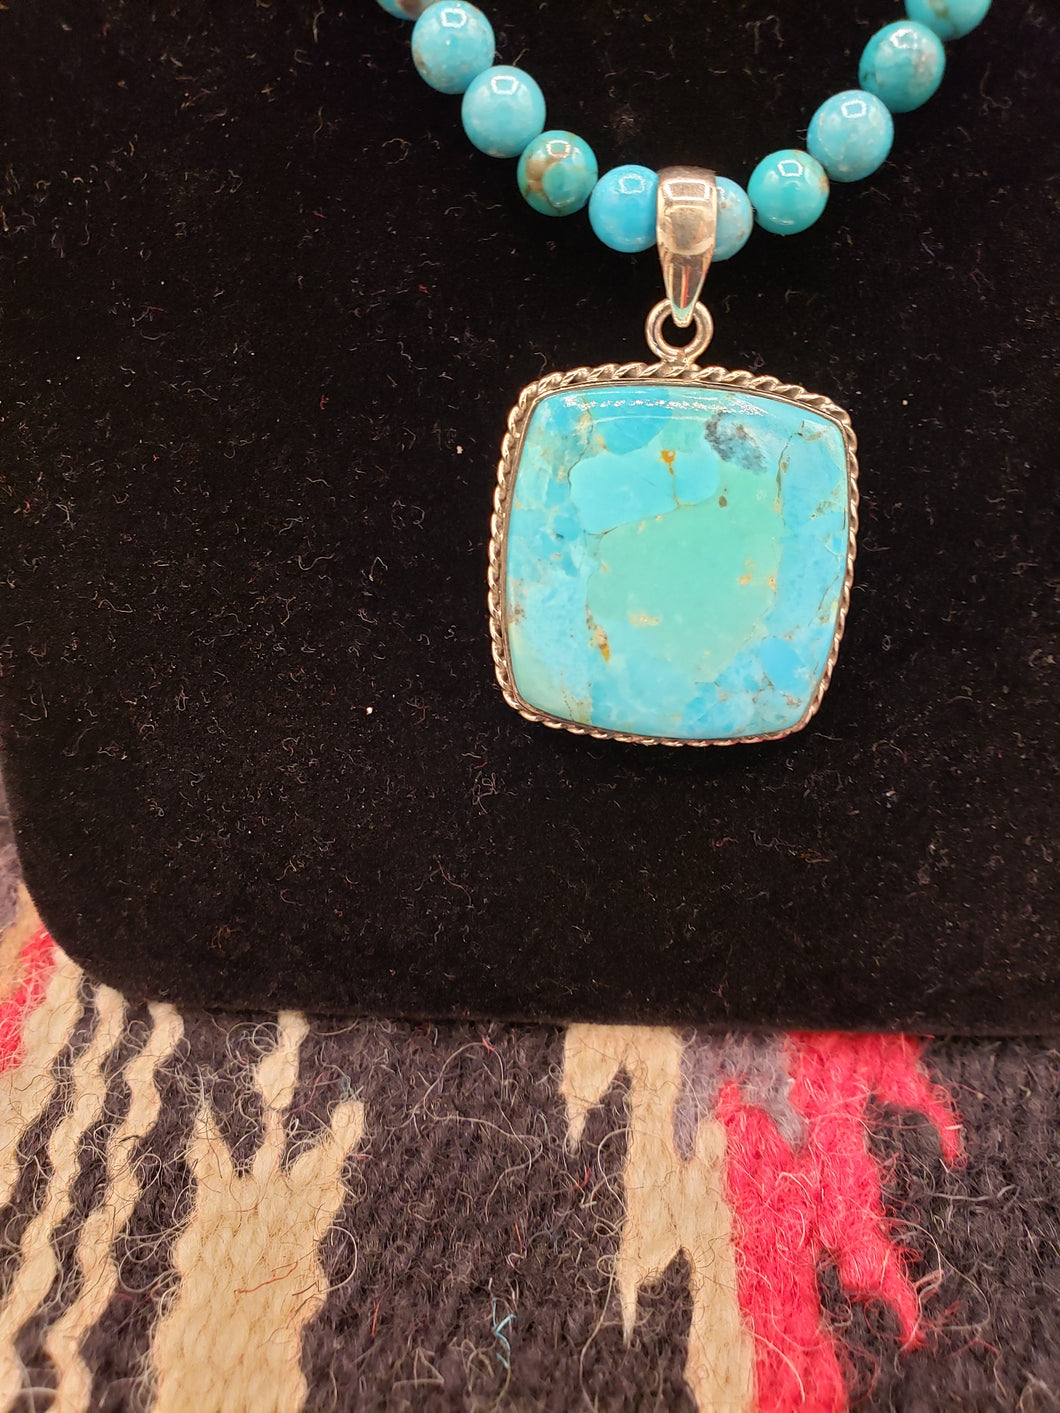 TURQUOISE SQUARE PENDANT ON 6MM BEADS